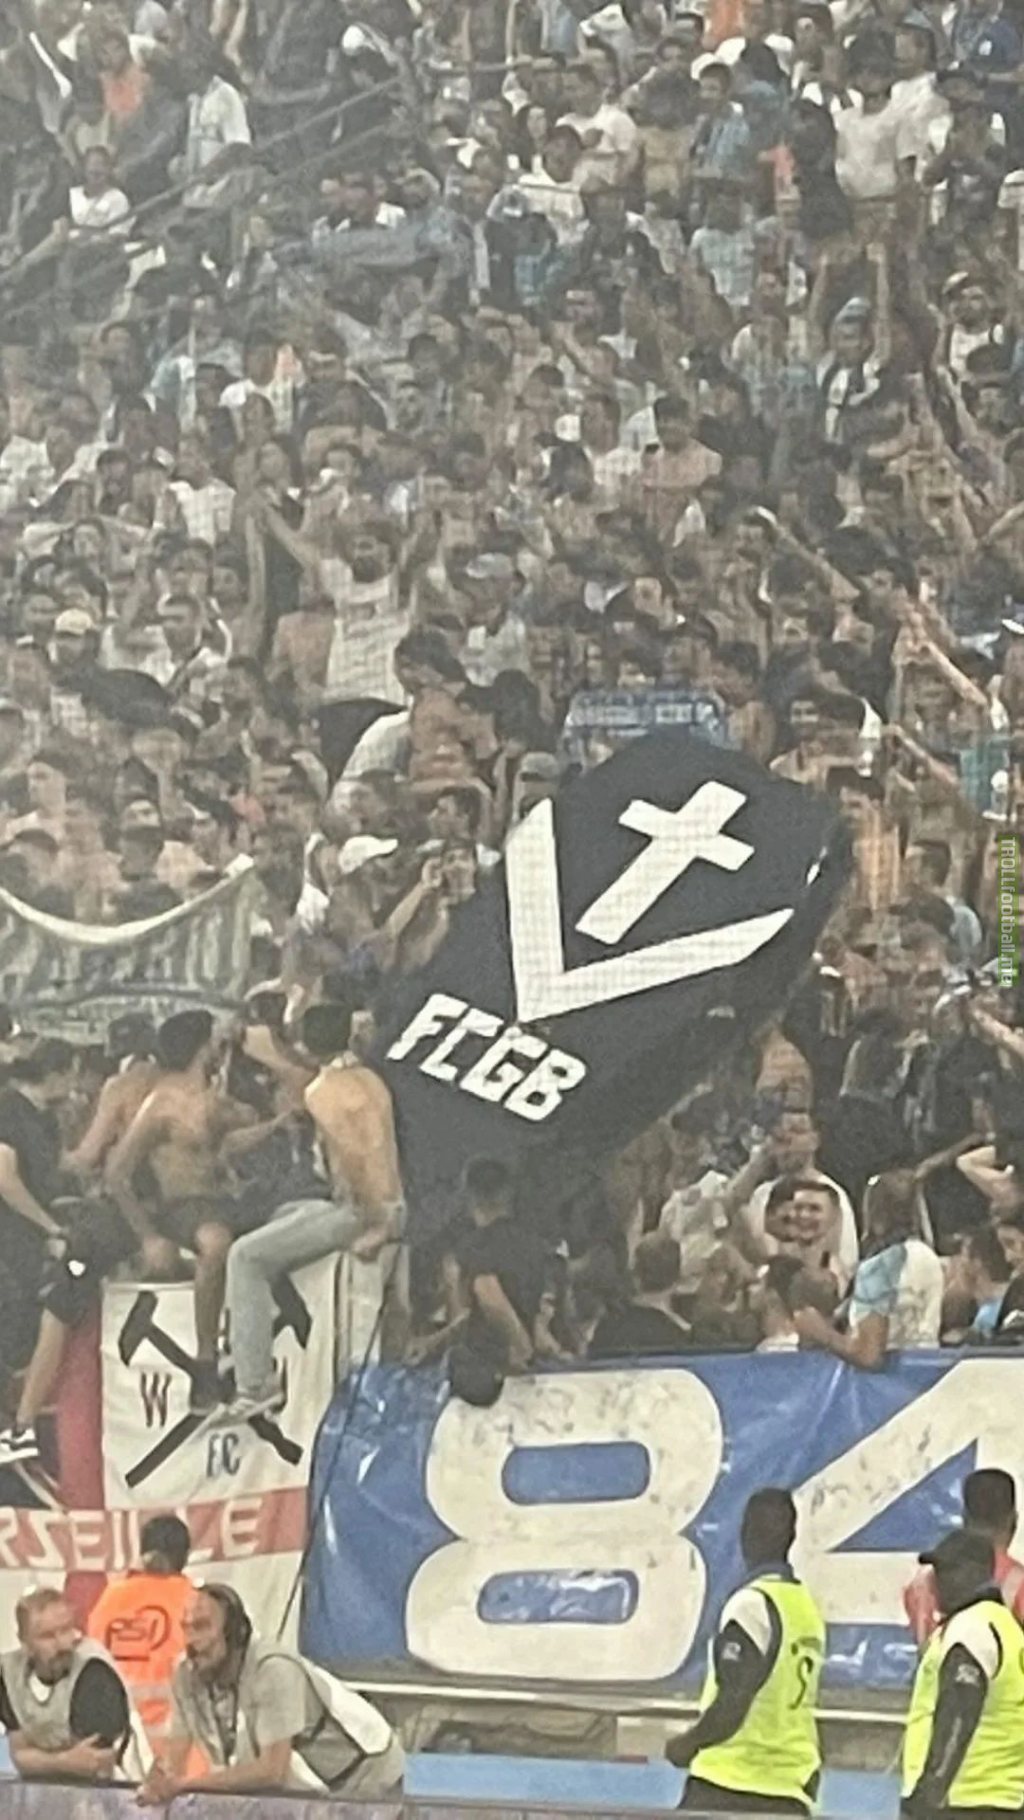 Marseille fans carrying a coffin of Girondins de Bordeaux to celebrate its relegation